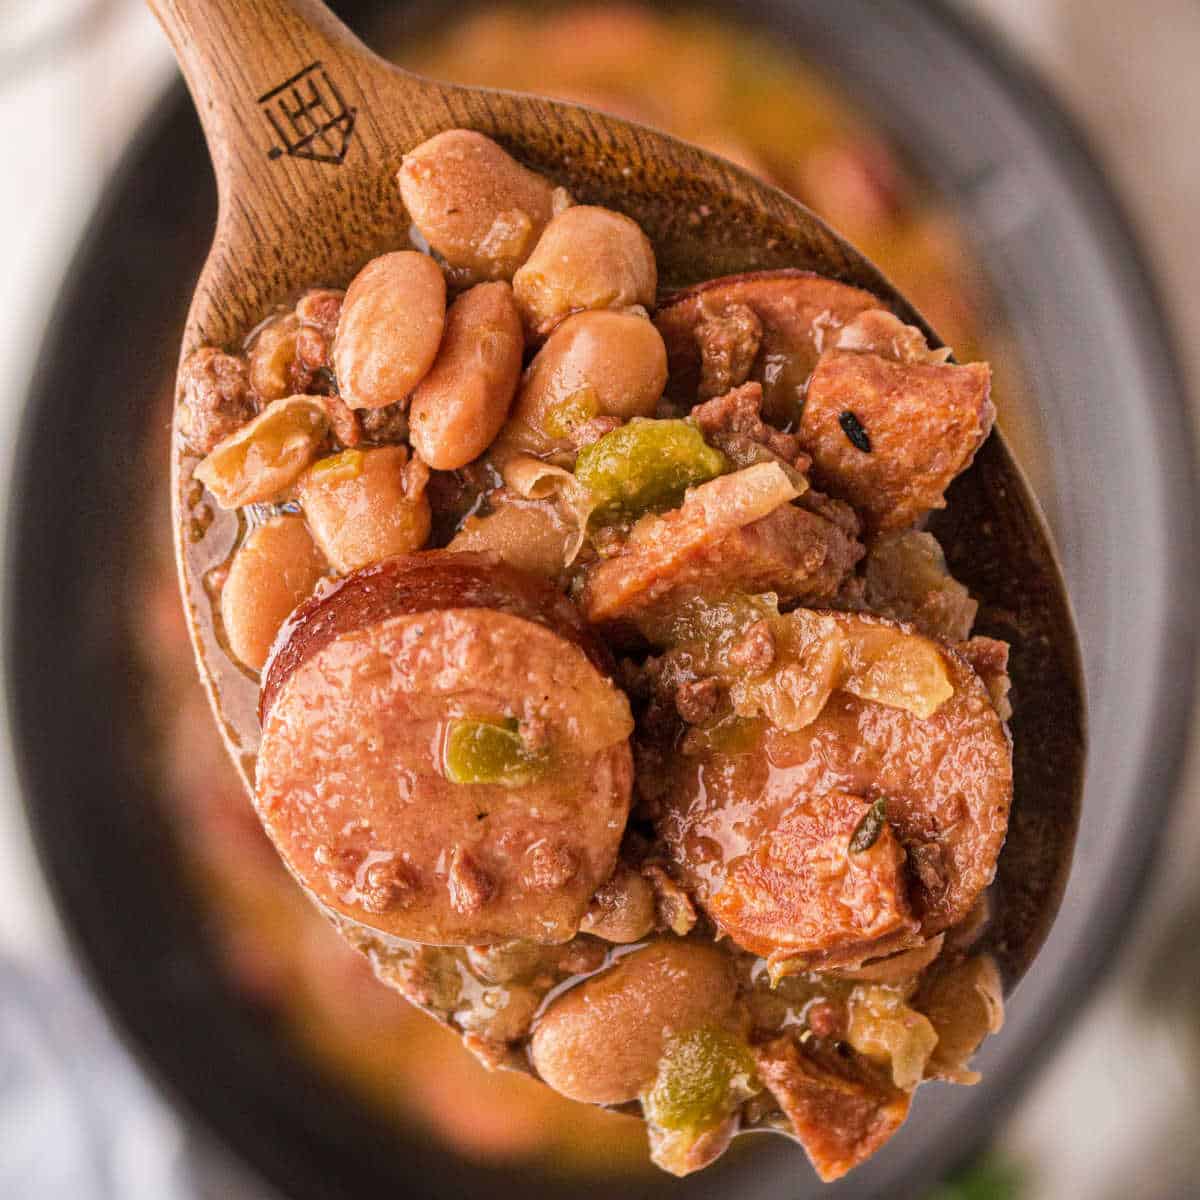 2-Quart Slow Cooker Recipe for Spicy Canned Pinto Beans • A